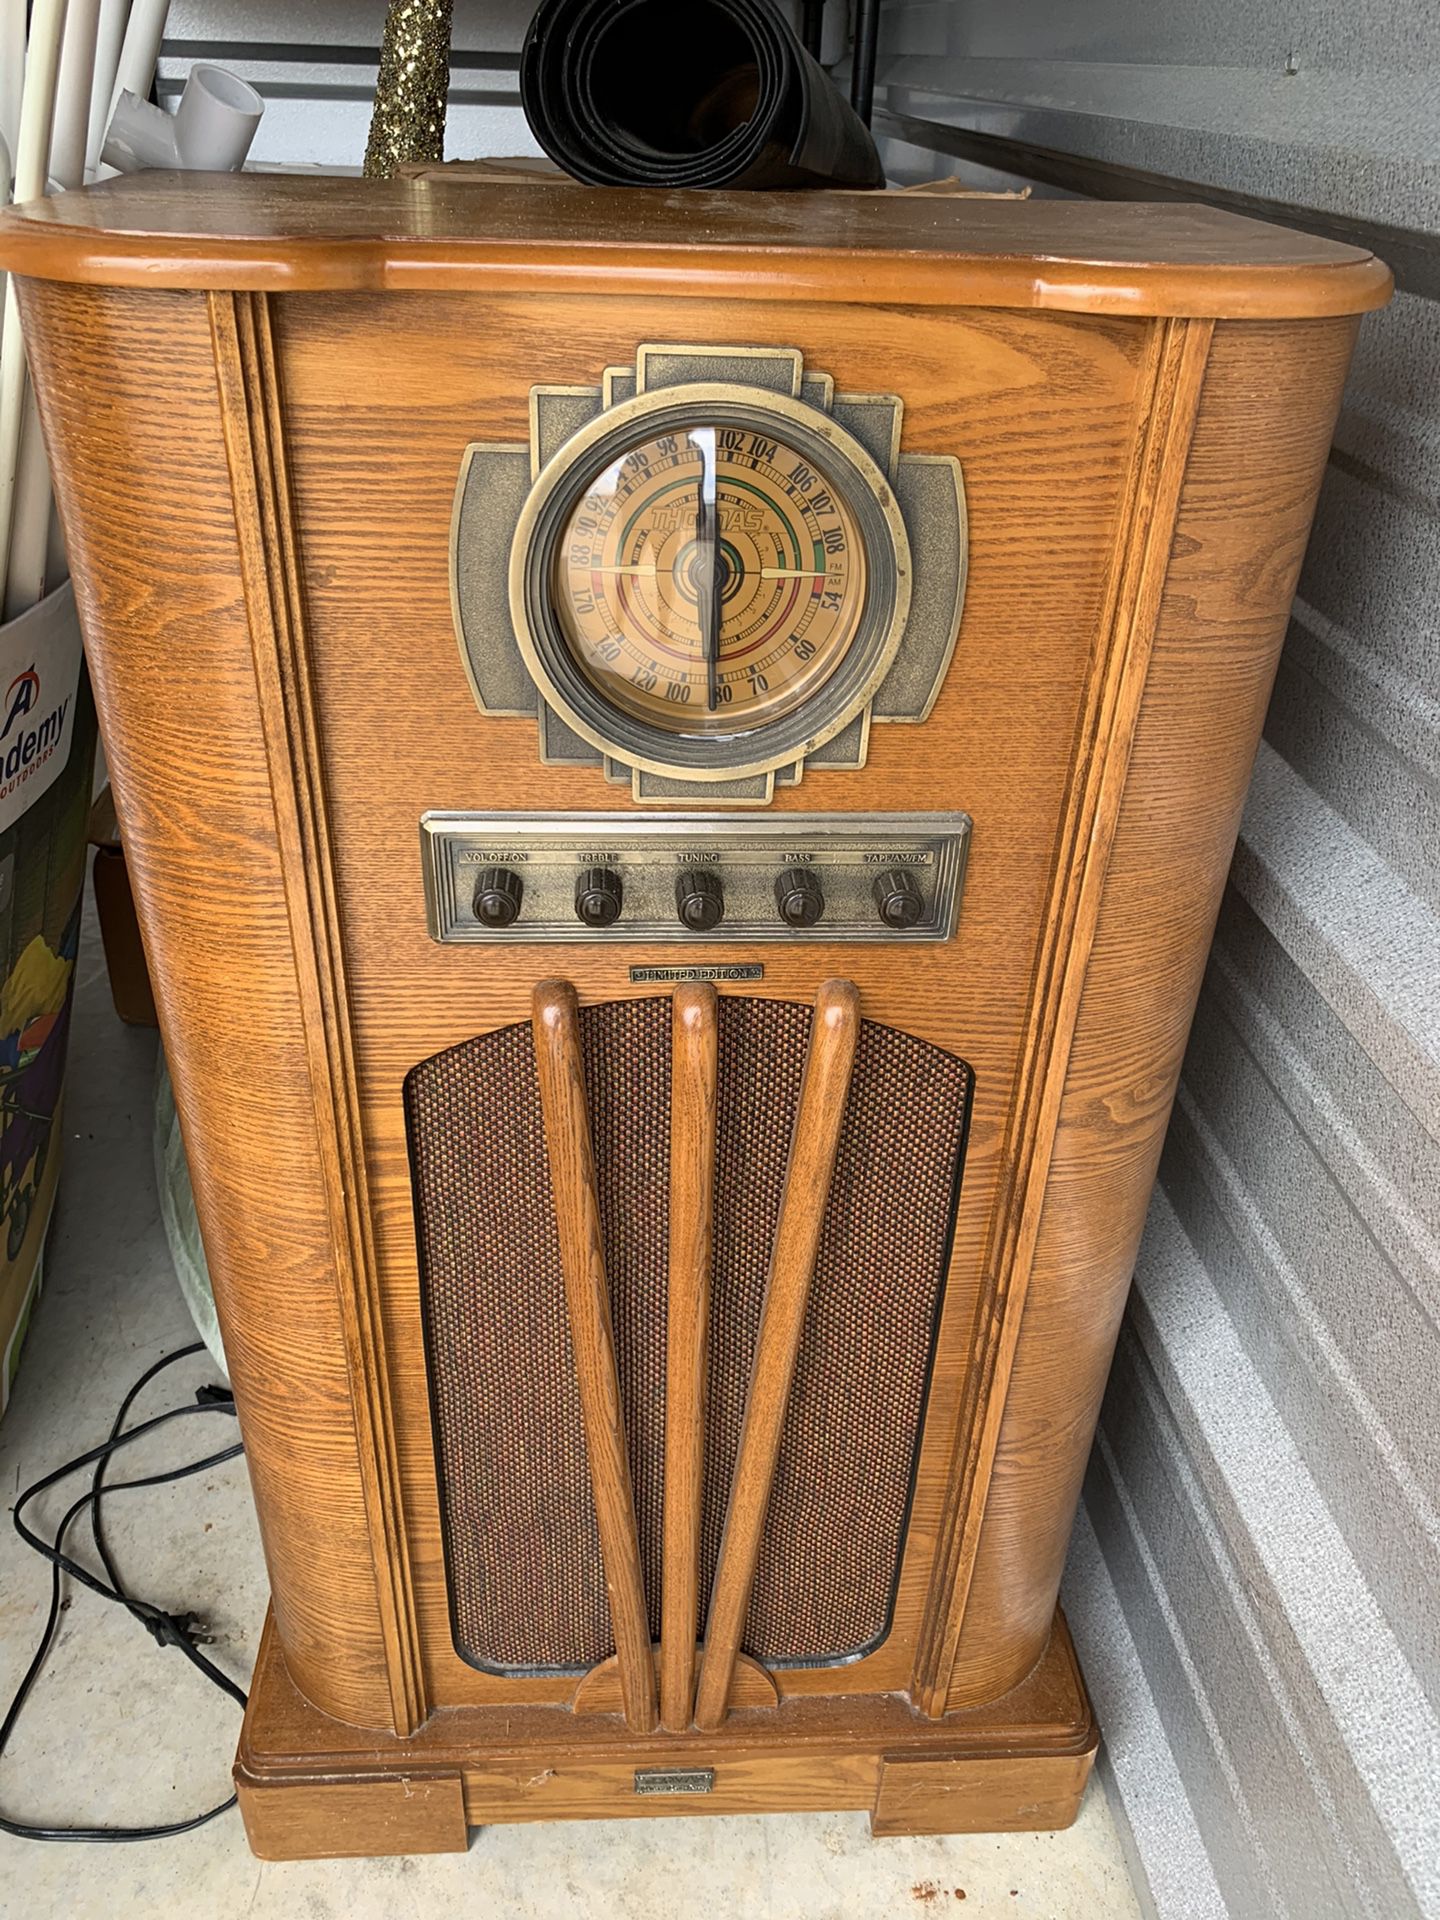 Old style radio works and has a cassette player